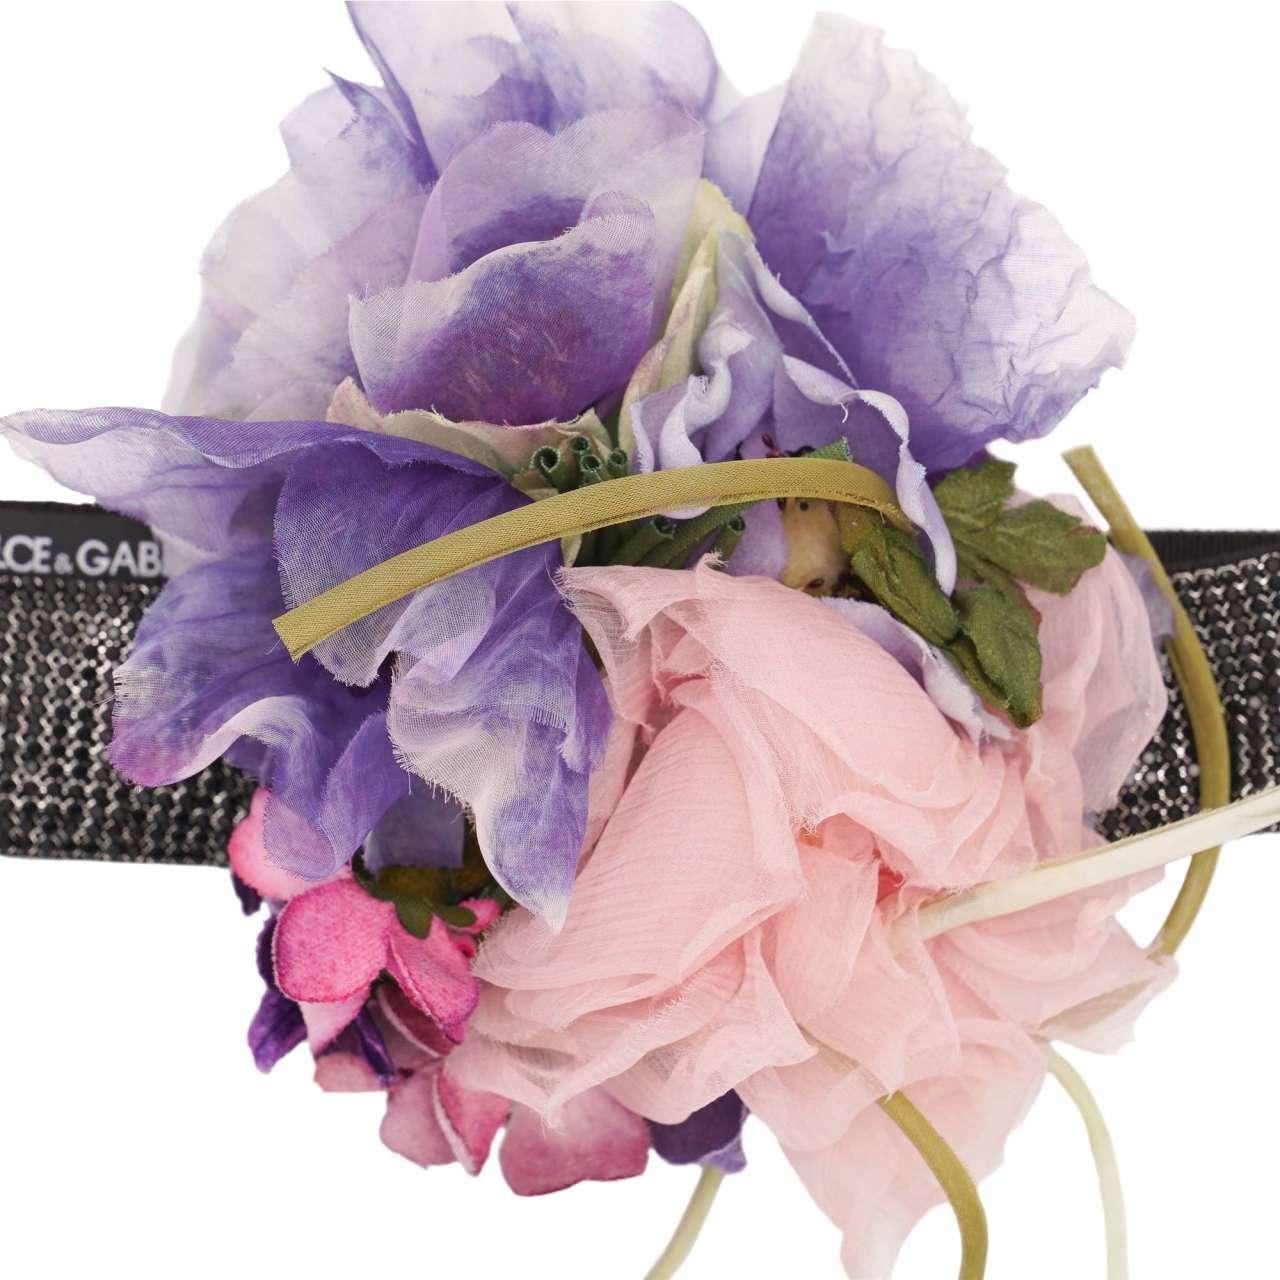 - Belt for dress covered with crystals and silk flower brooch in purple and black by DOLCE & GABBANA - New with Tag - MADE IN ITALY - Modell: FB279Z-GDBBV-S8000 - Material: 90% Crystals, 10% Brass - Lining: 60% Cotton, 40% Acetate - Embroidery: 67%